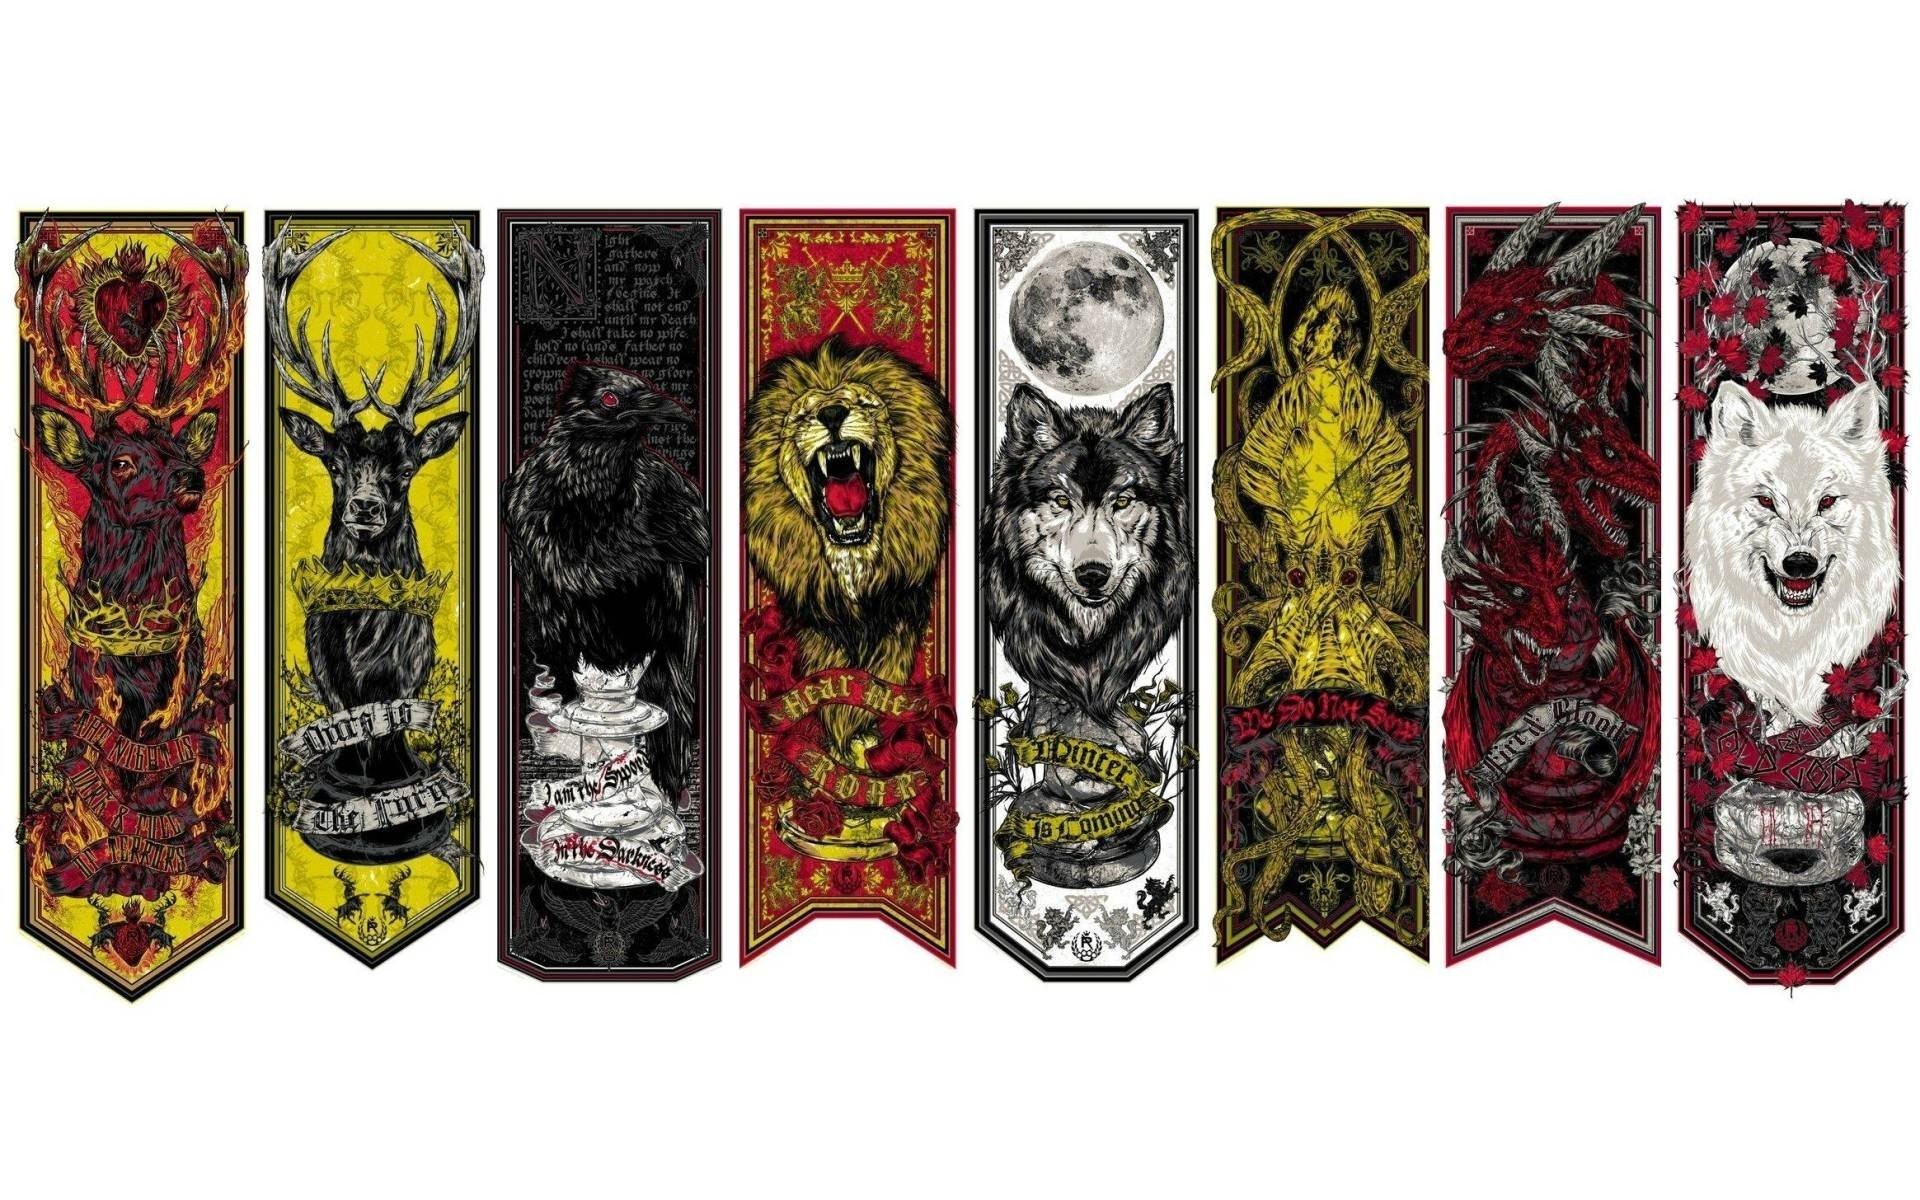 1920x1200 Game of Thrones house crests wallpaper, Game of Thrones house crests TV  Show HD desktop wallpaper